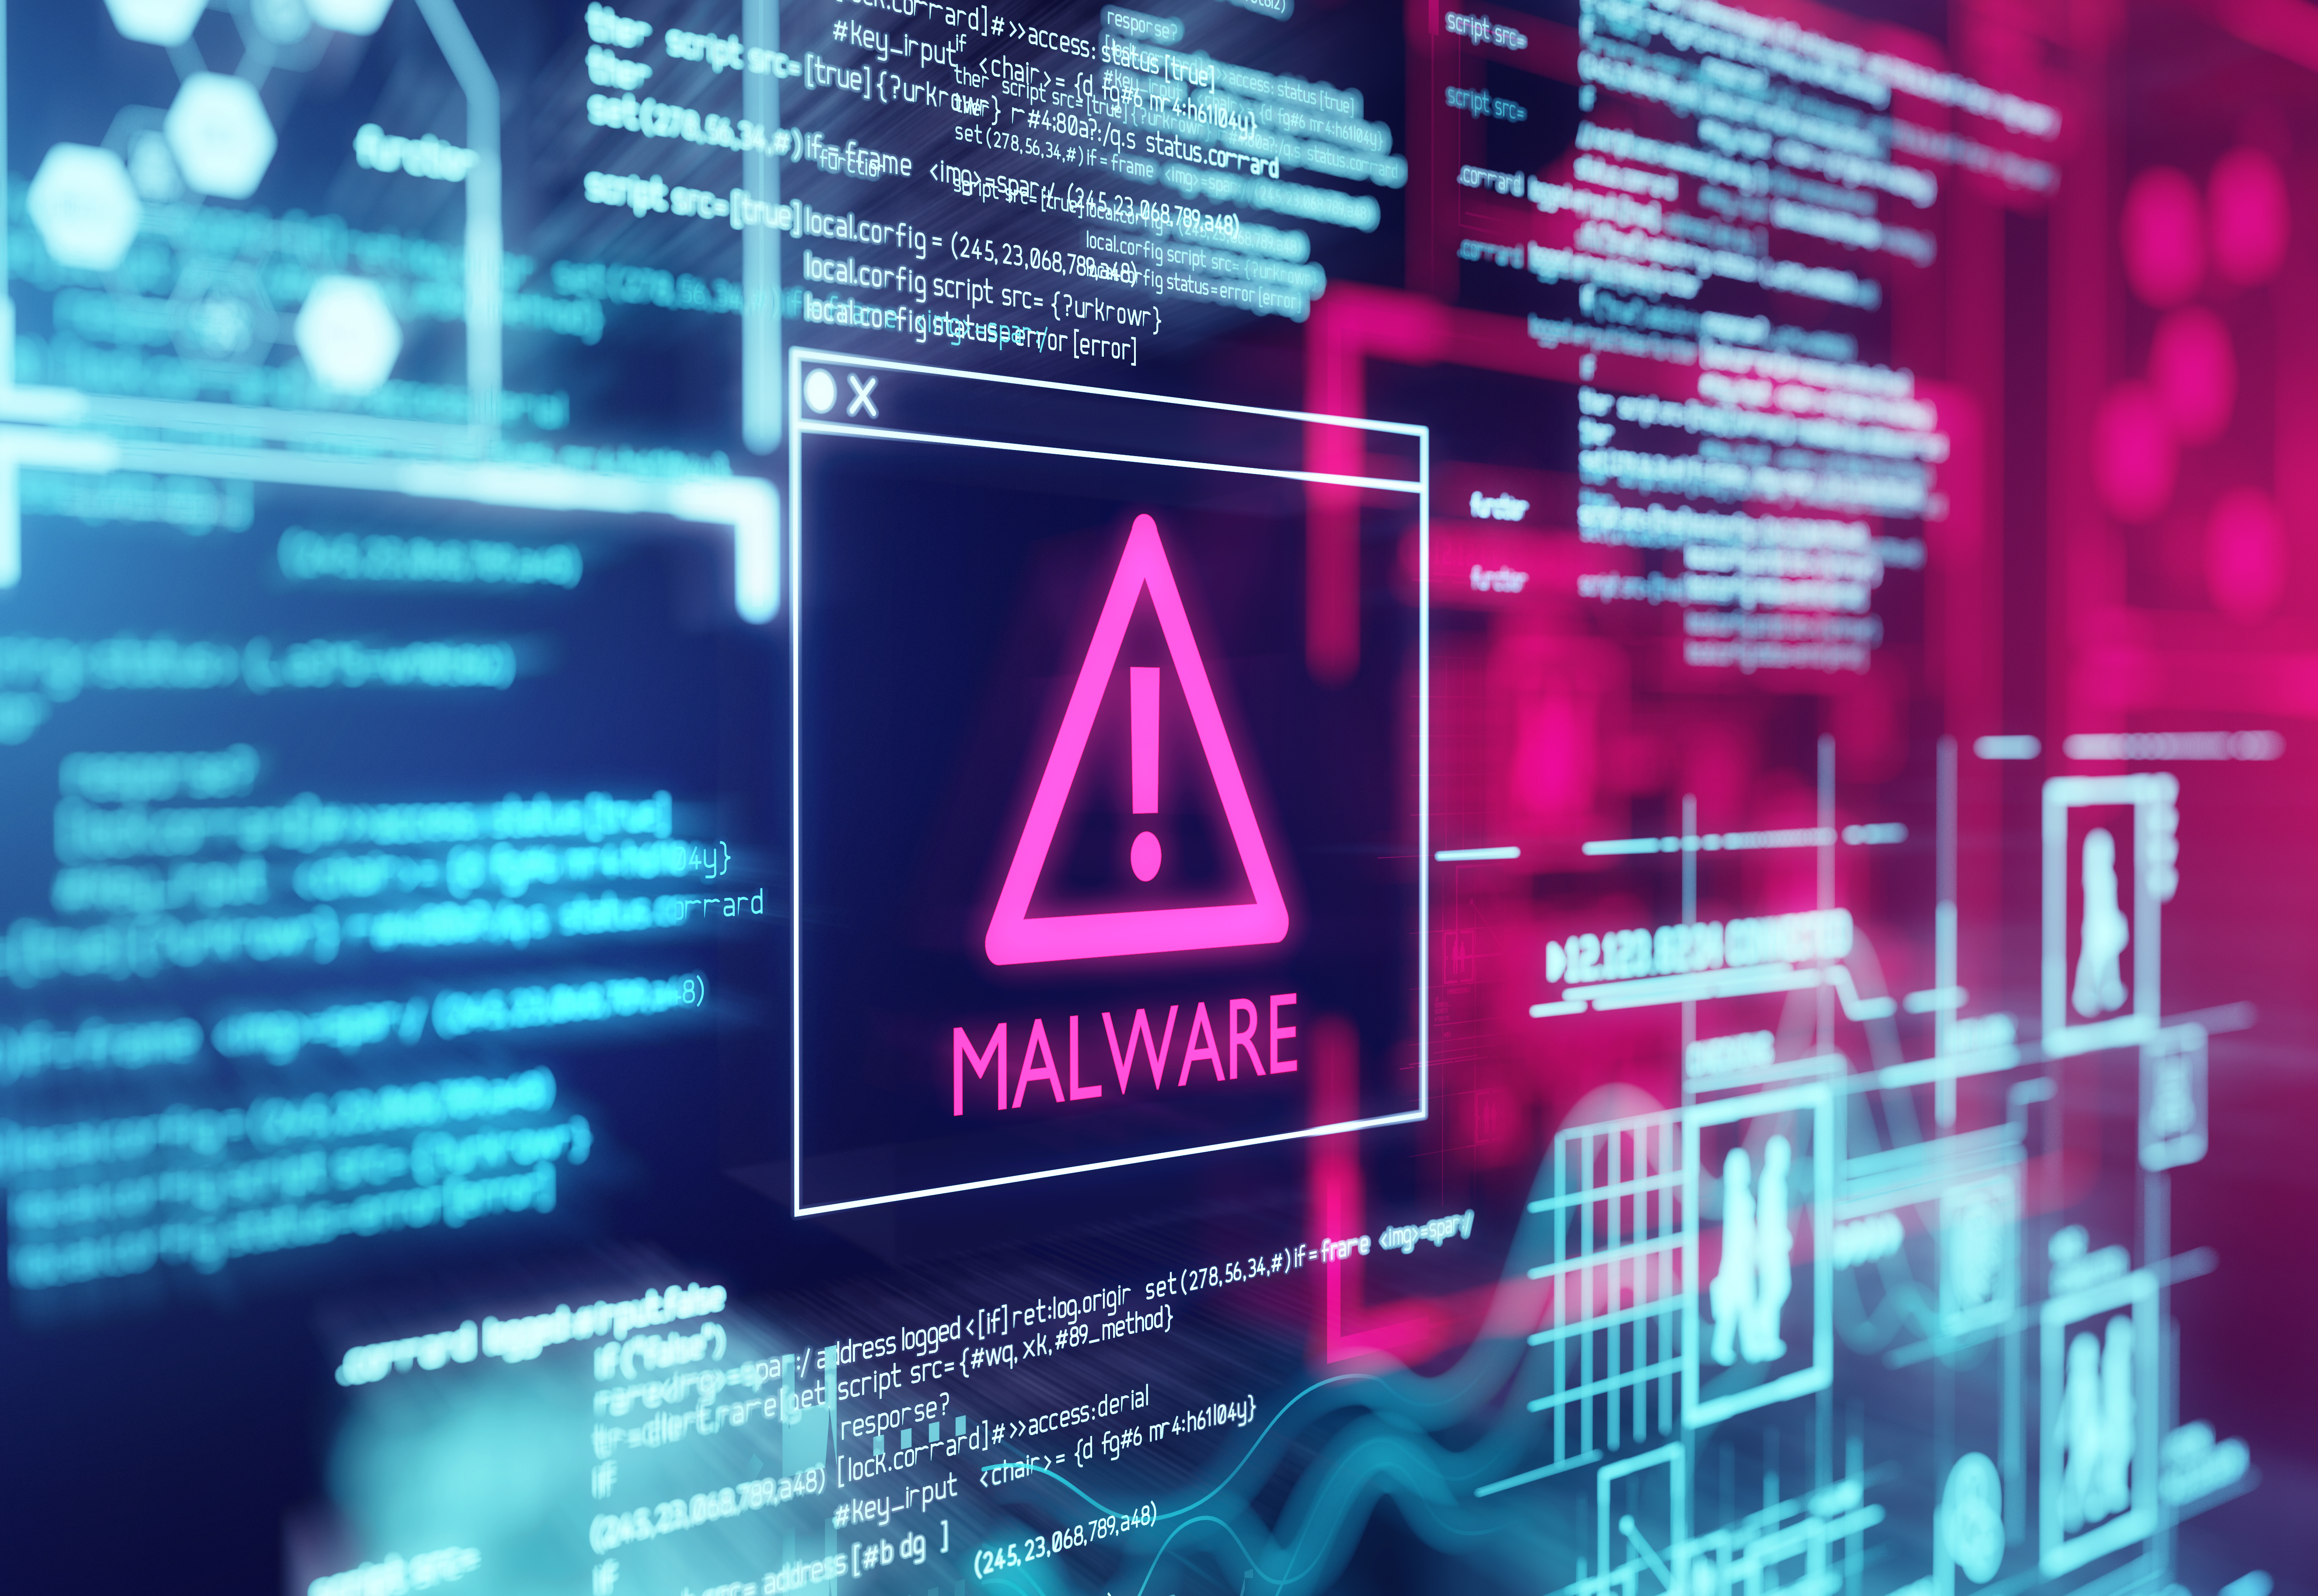 Malware warning in pink on a futuristic computer screen full of code.